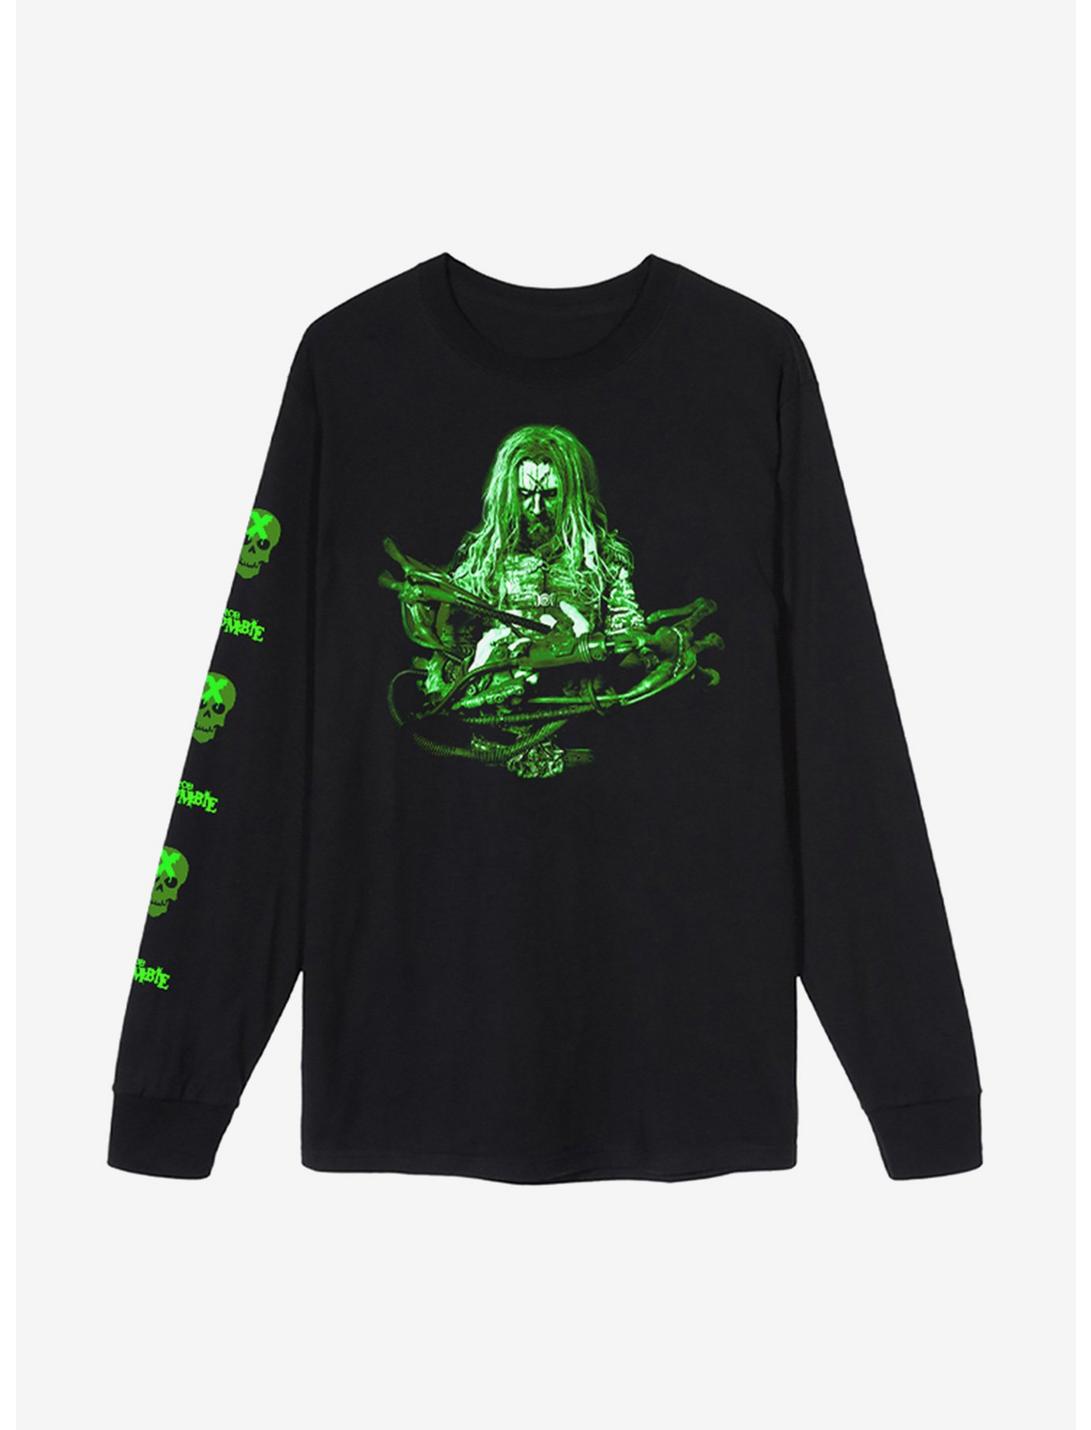 Rob Zombie Crossed Long-Sleeve T-Shirt | Hot Topic